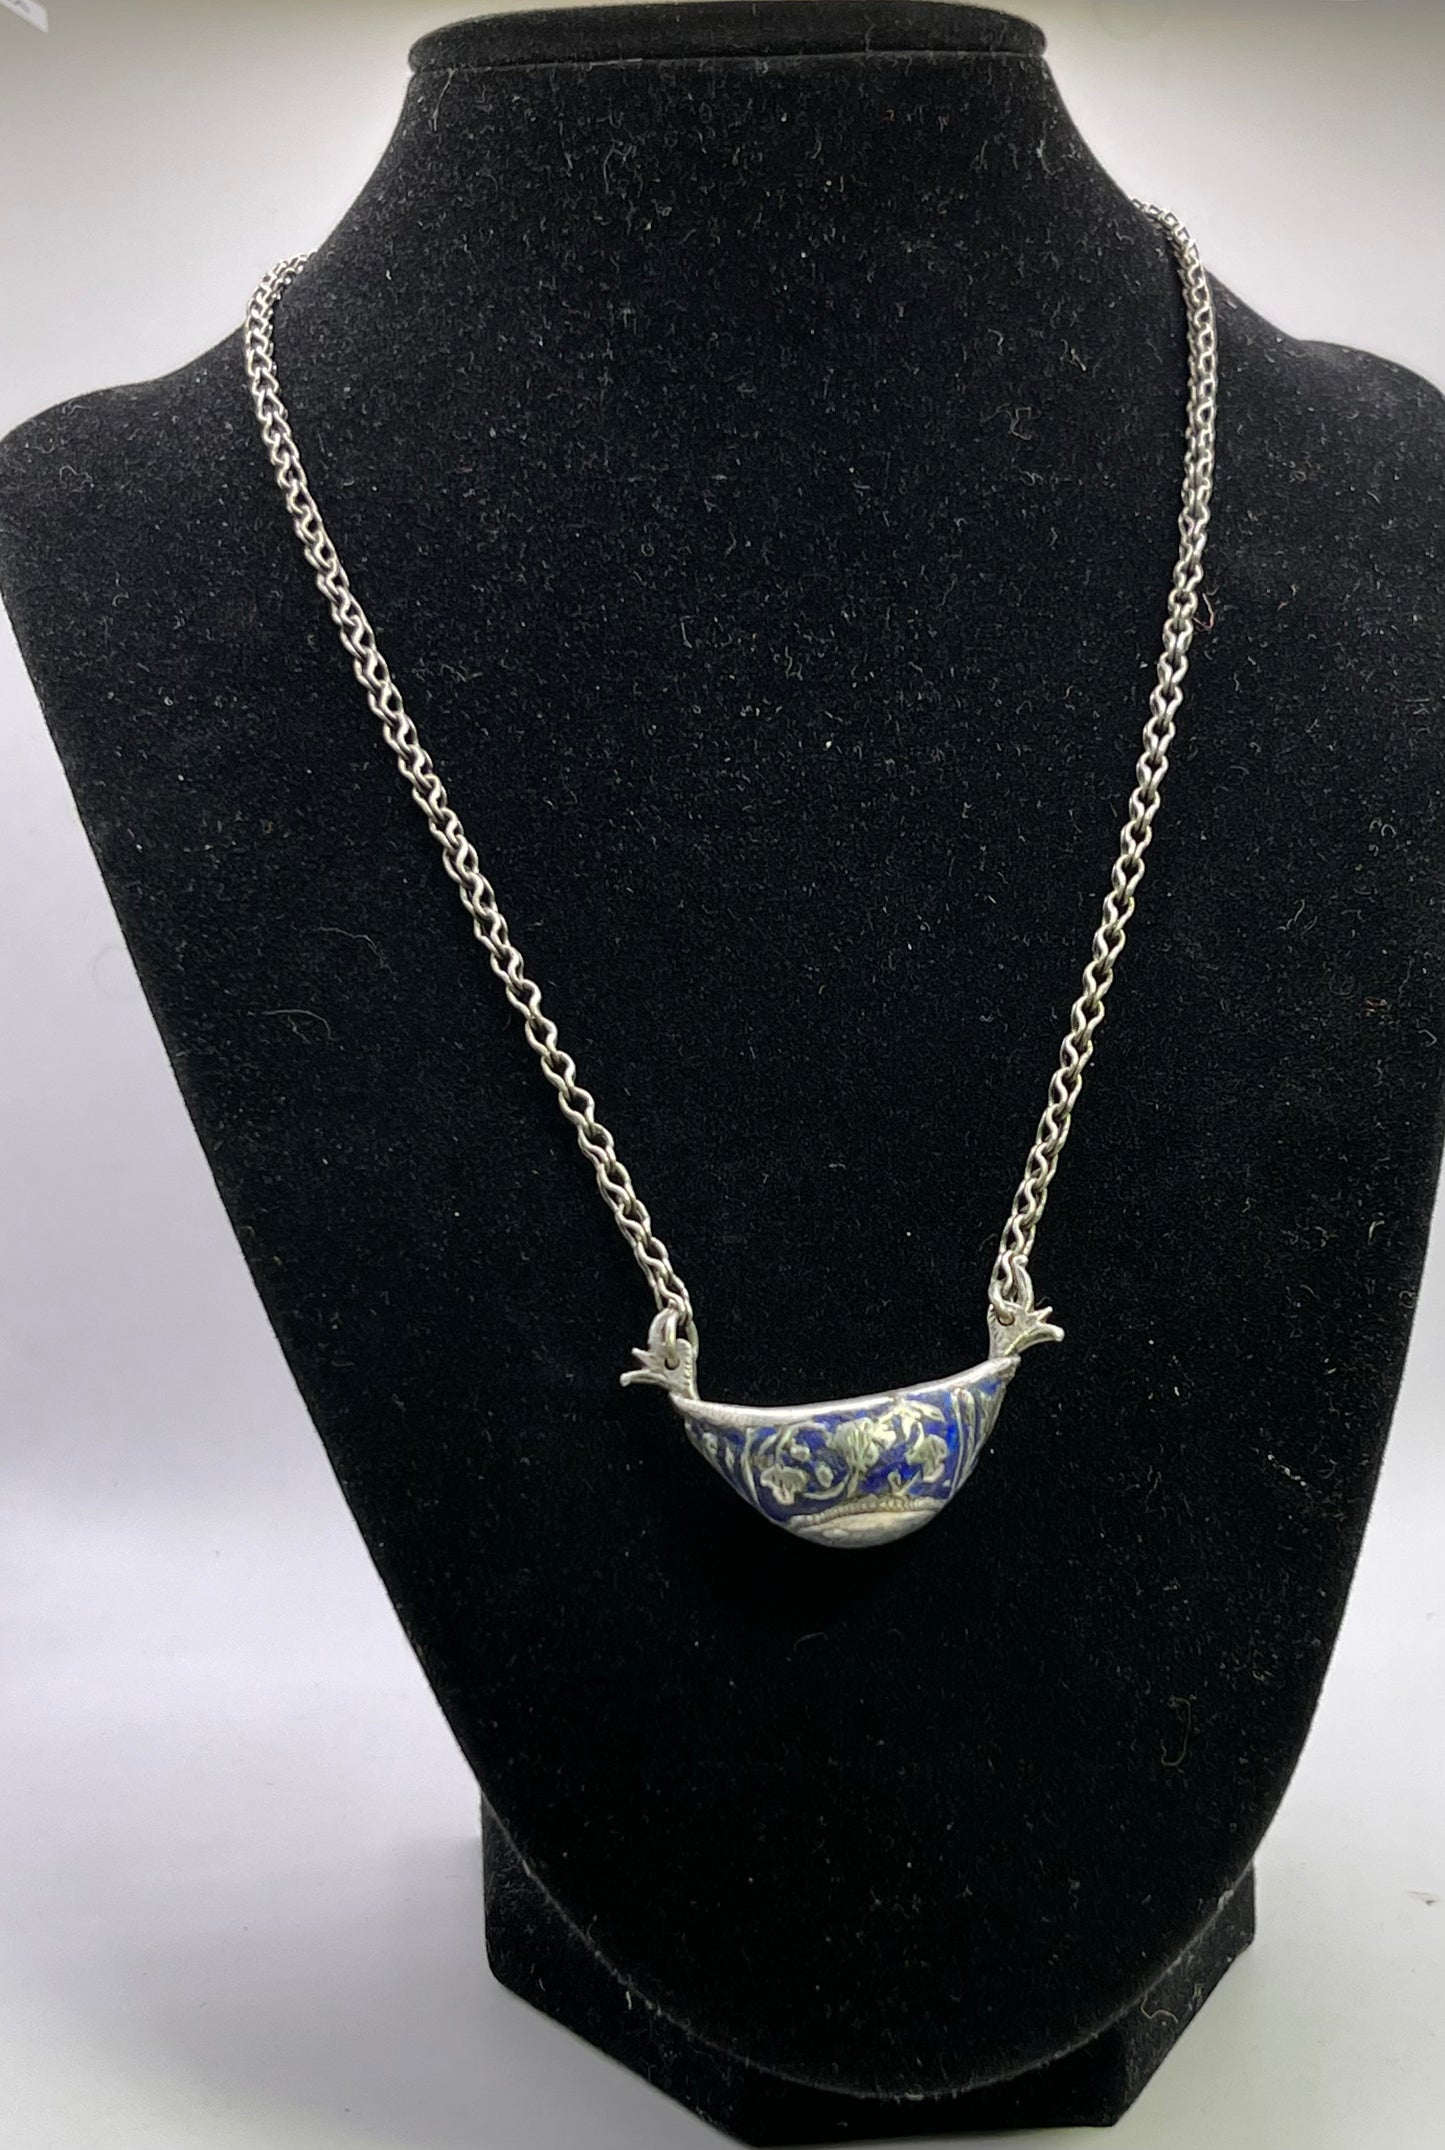 A vintage silver pendant and chain